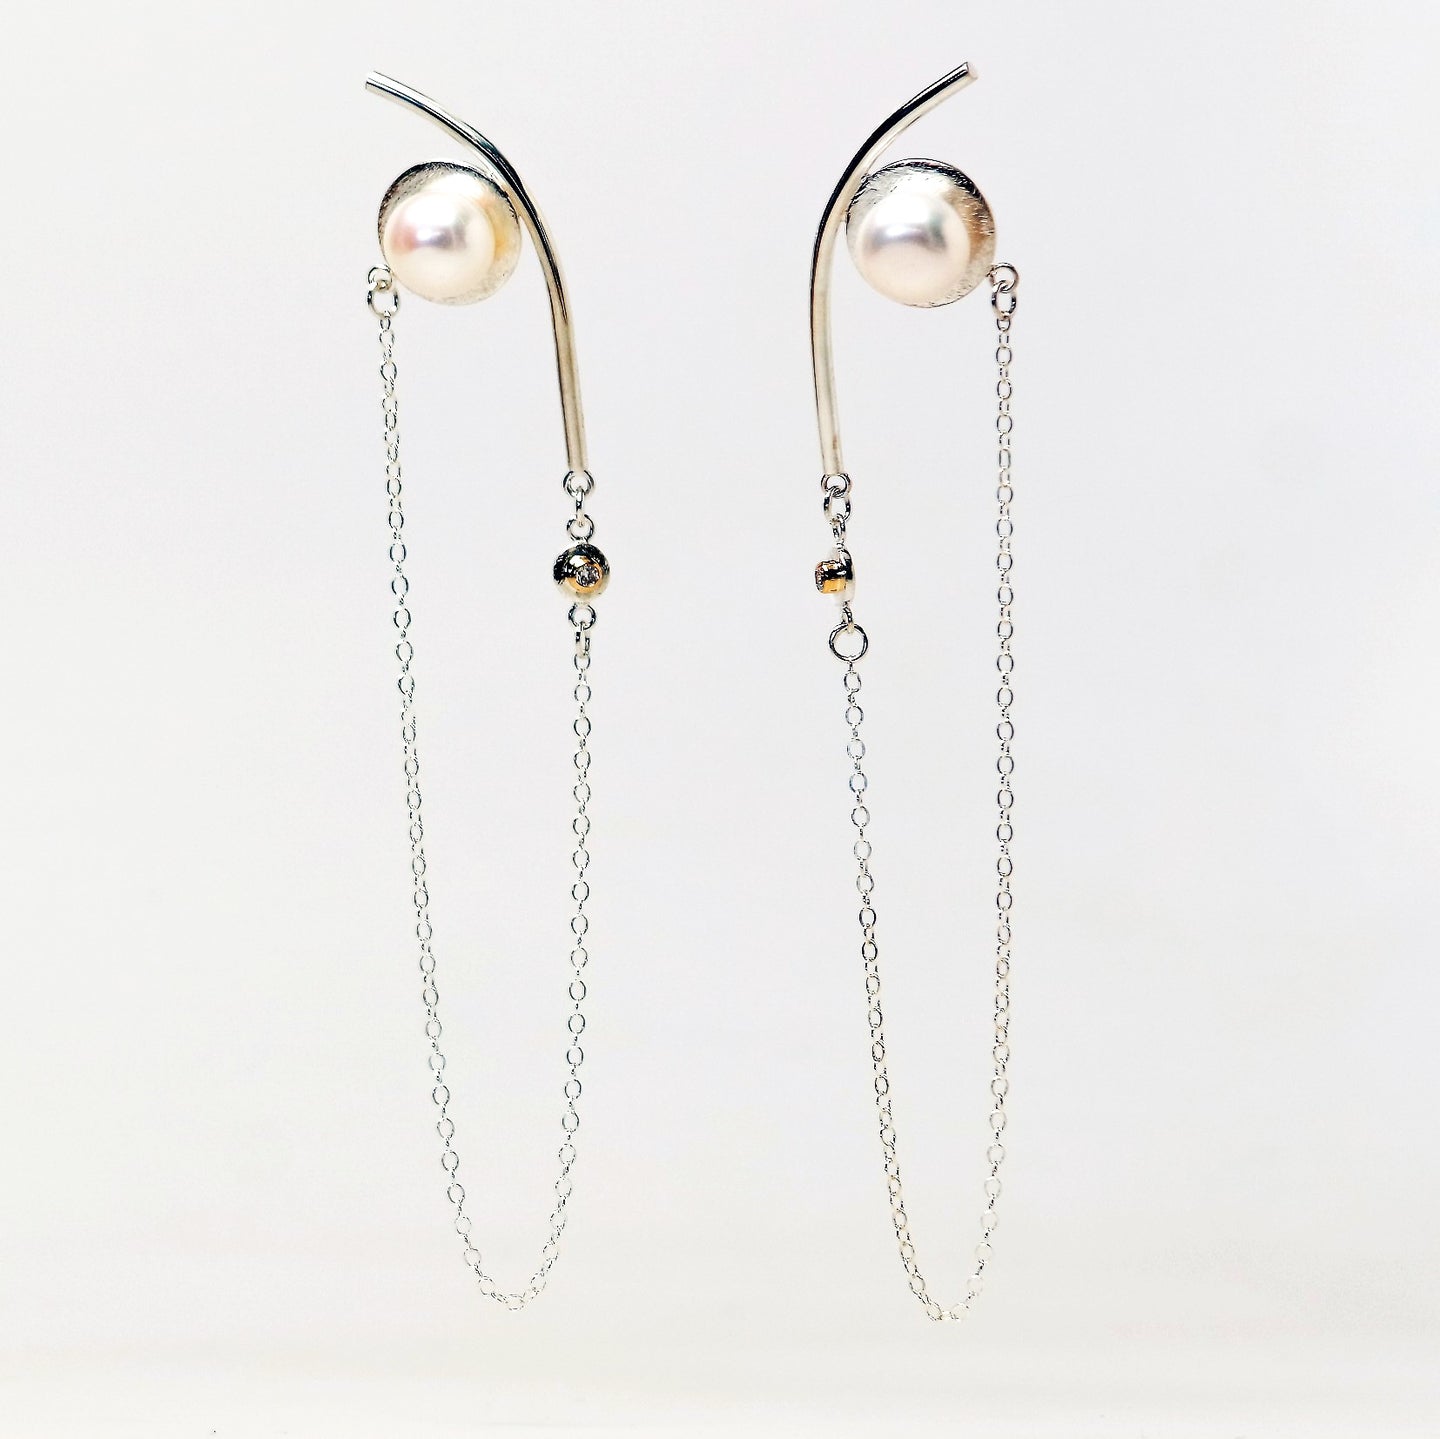 Saturn Earrings - Sterling Silver, 18KT Yellow Gold Bezel, Lab Grown Diamonds, White Freshwater Button Pearls - TIN HAUS Jewelry